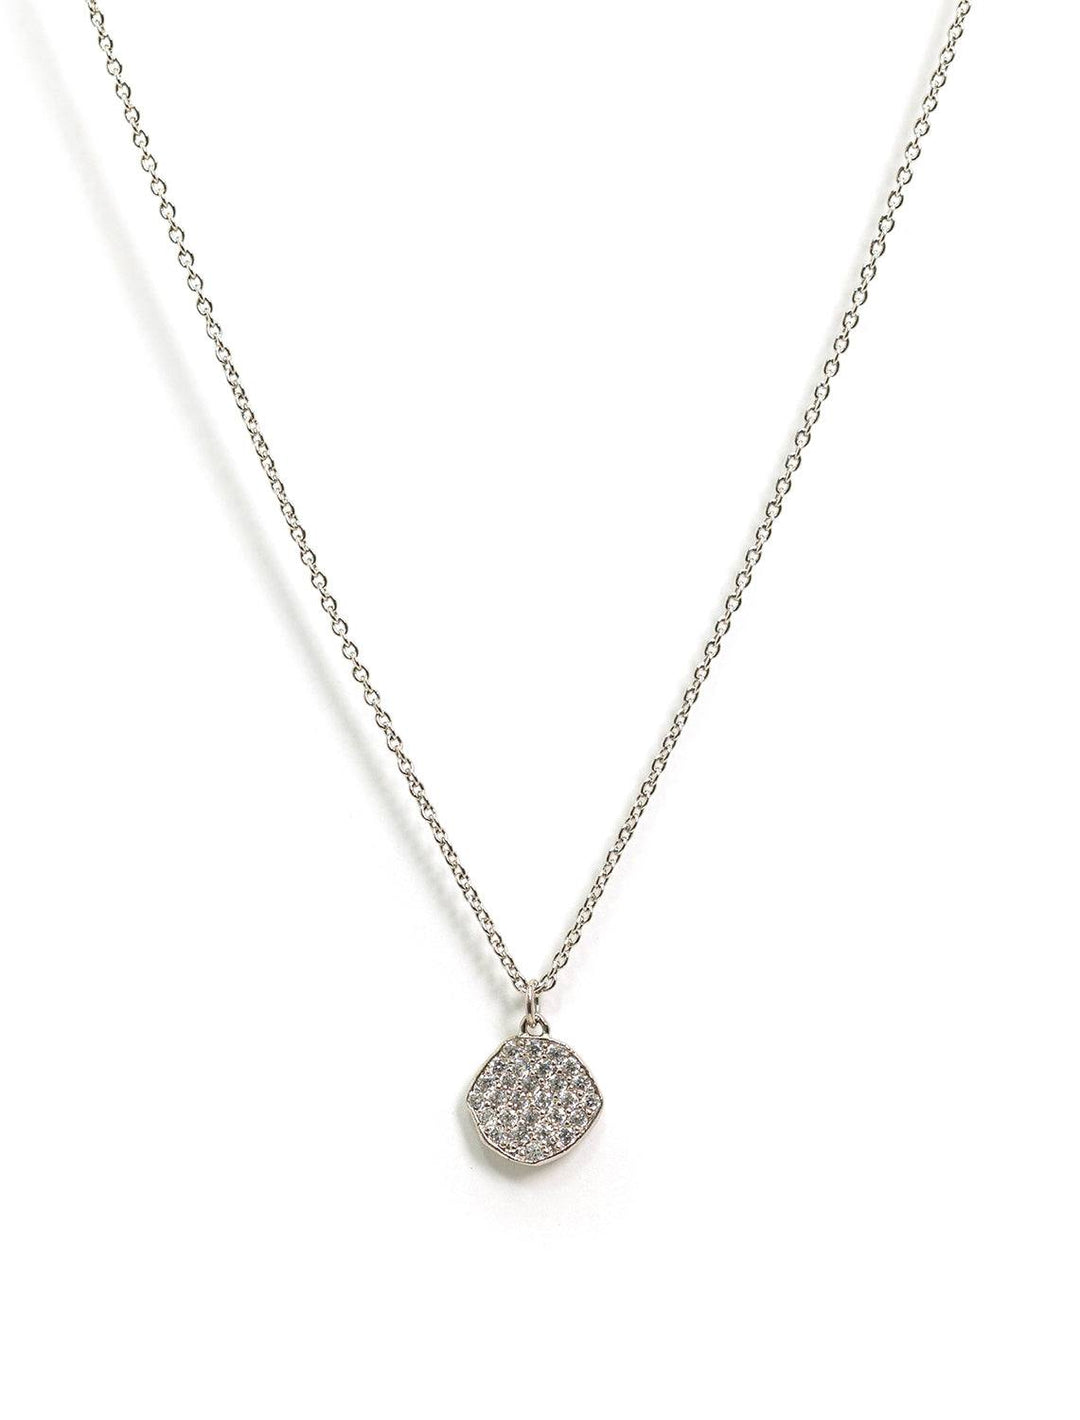 Front view of Tai's simple chain necklace with cz disc.